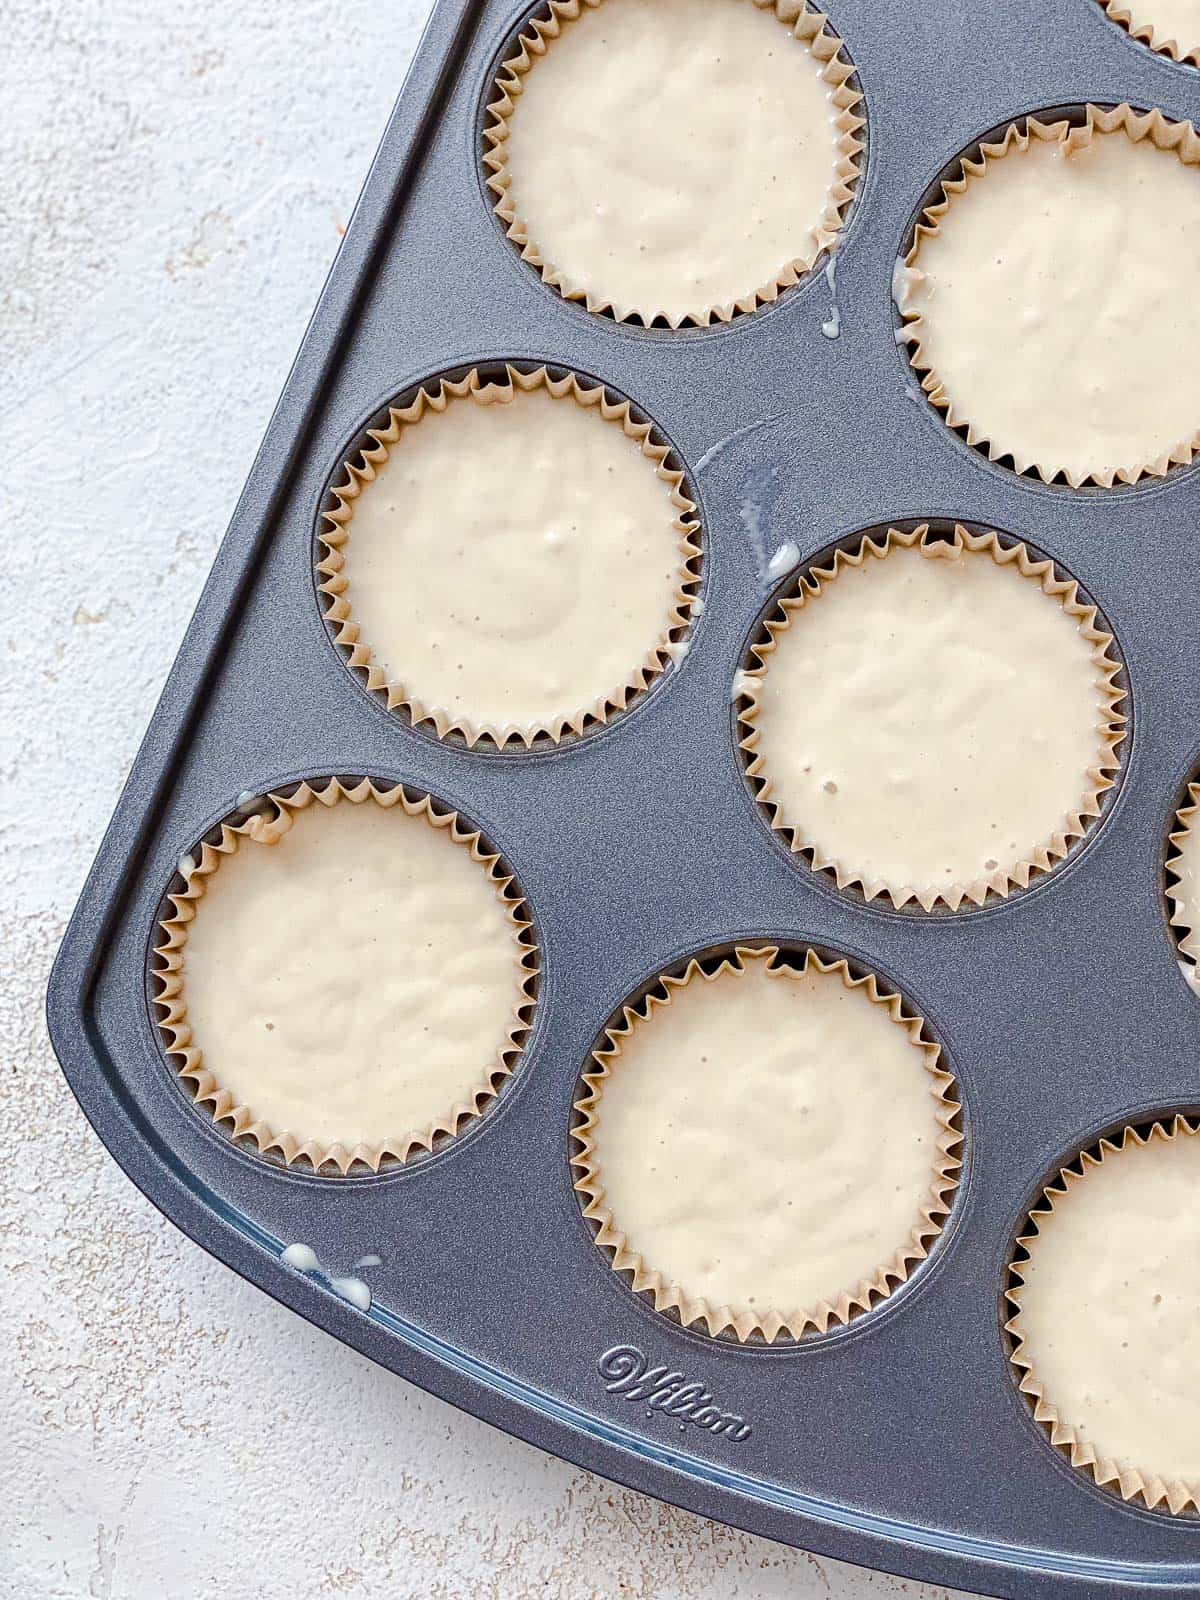 process shot showing addition of cupcake batter in muffin tin